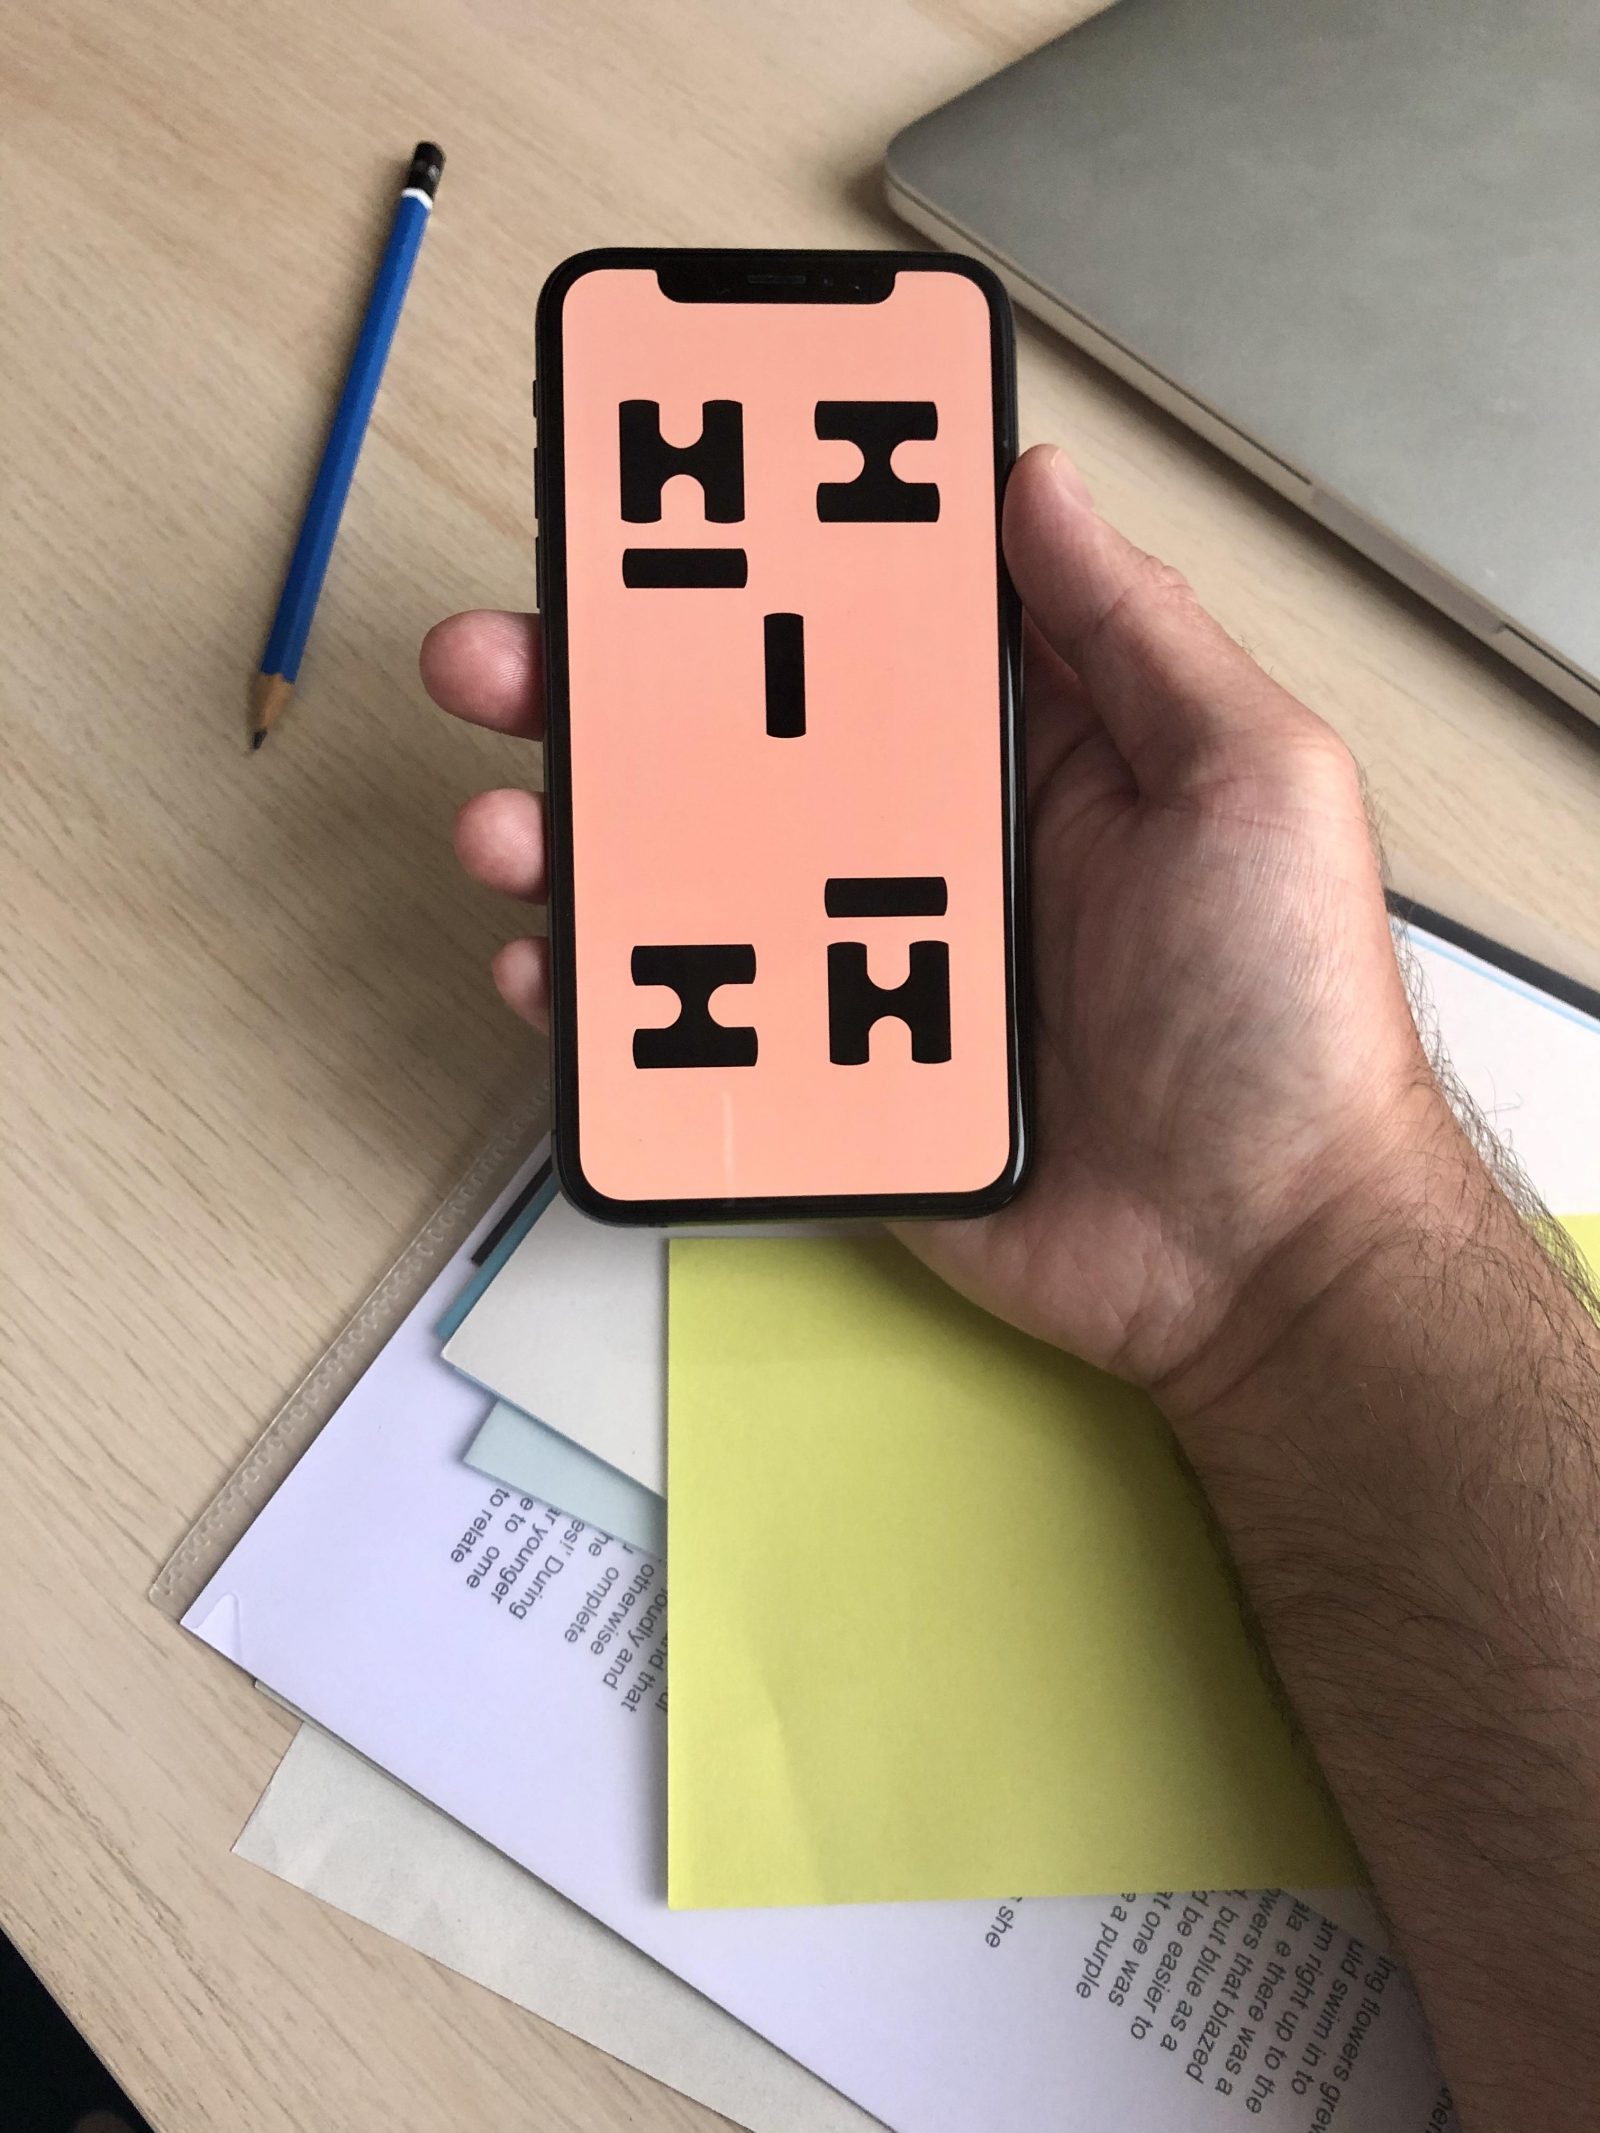 A hand holding a smart phone with an image on the screen of a pattern with pink background and the letters H and I arranged in a pattern.